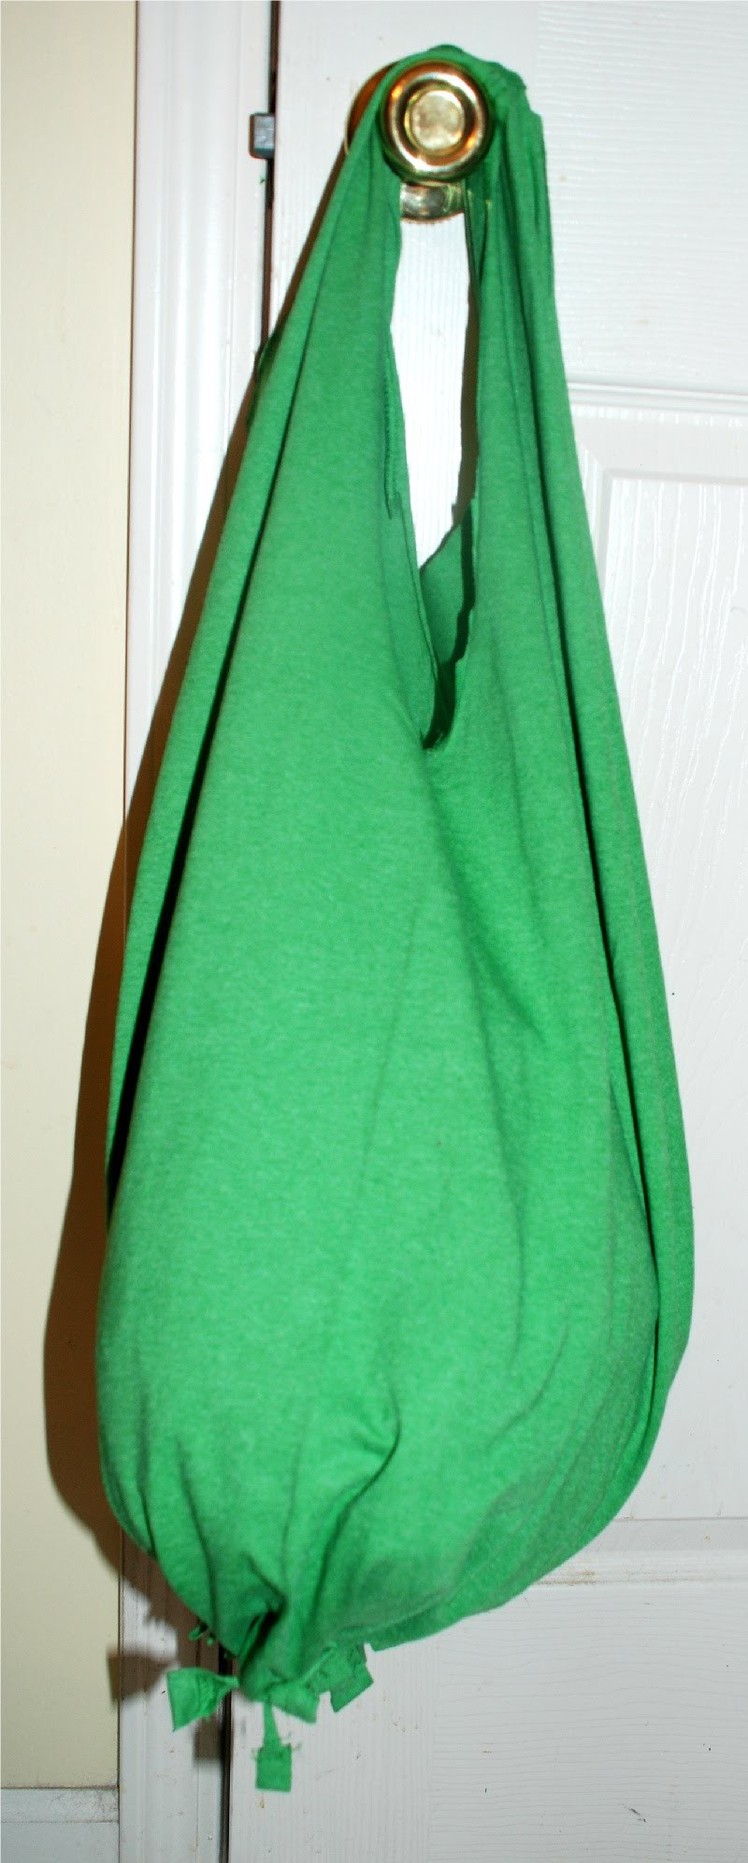 How to make a T-shirt into a Bag With out Sewing